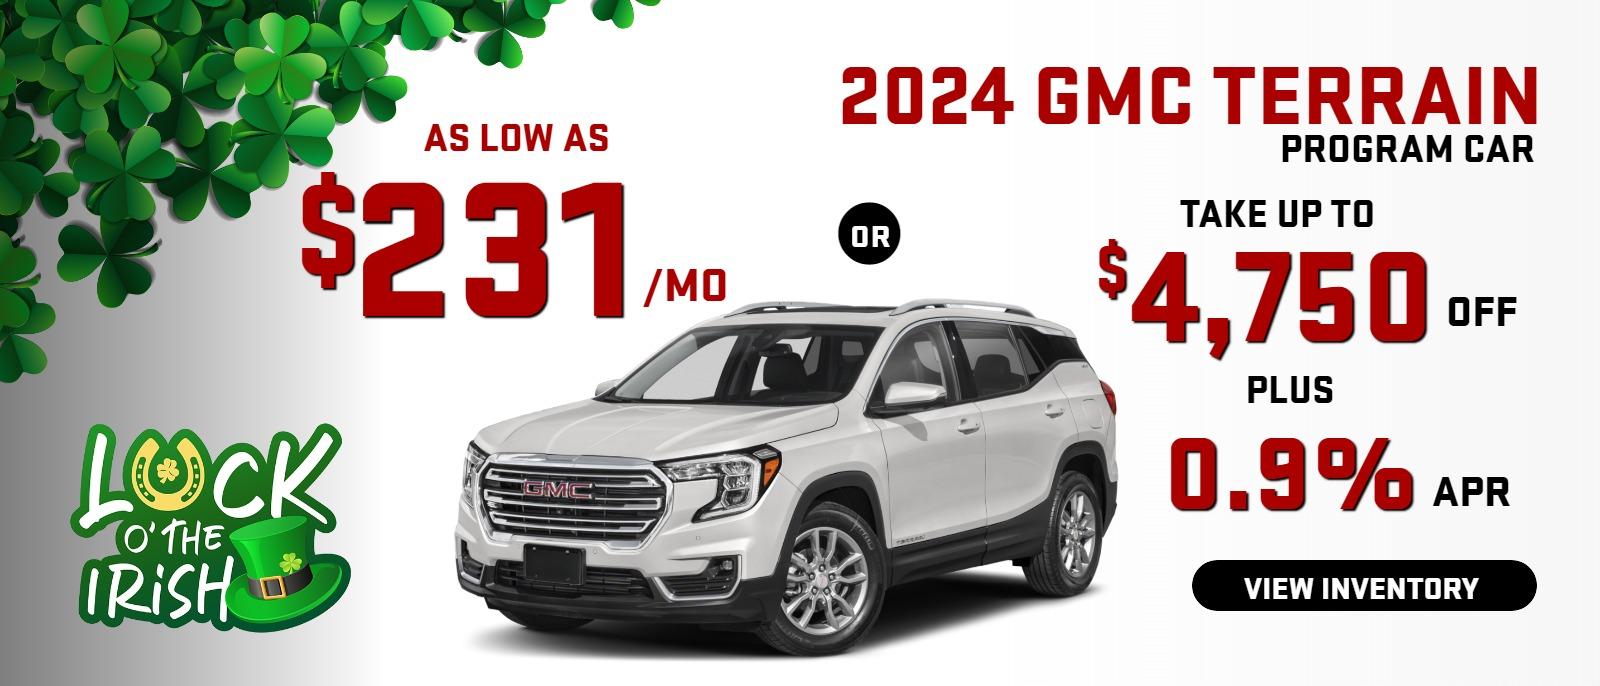 2024 GMC Terrain
stock L5405
take up to $4750 OFF 
OR AS LOW AS 
$231/MO
& 0.9% FINANCE